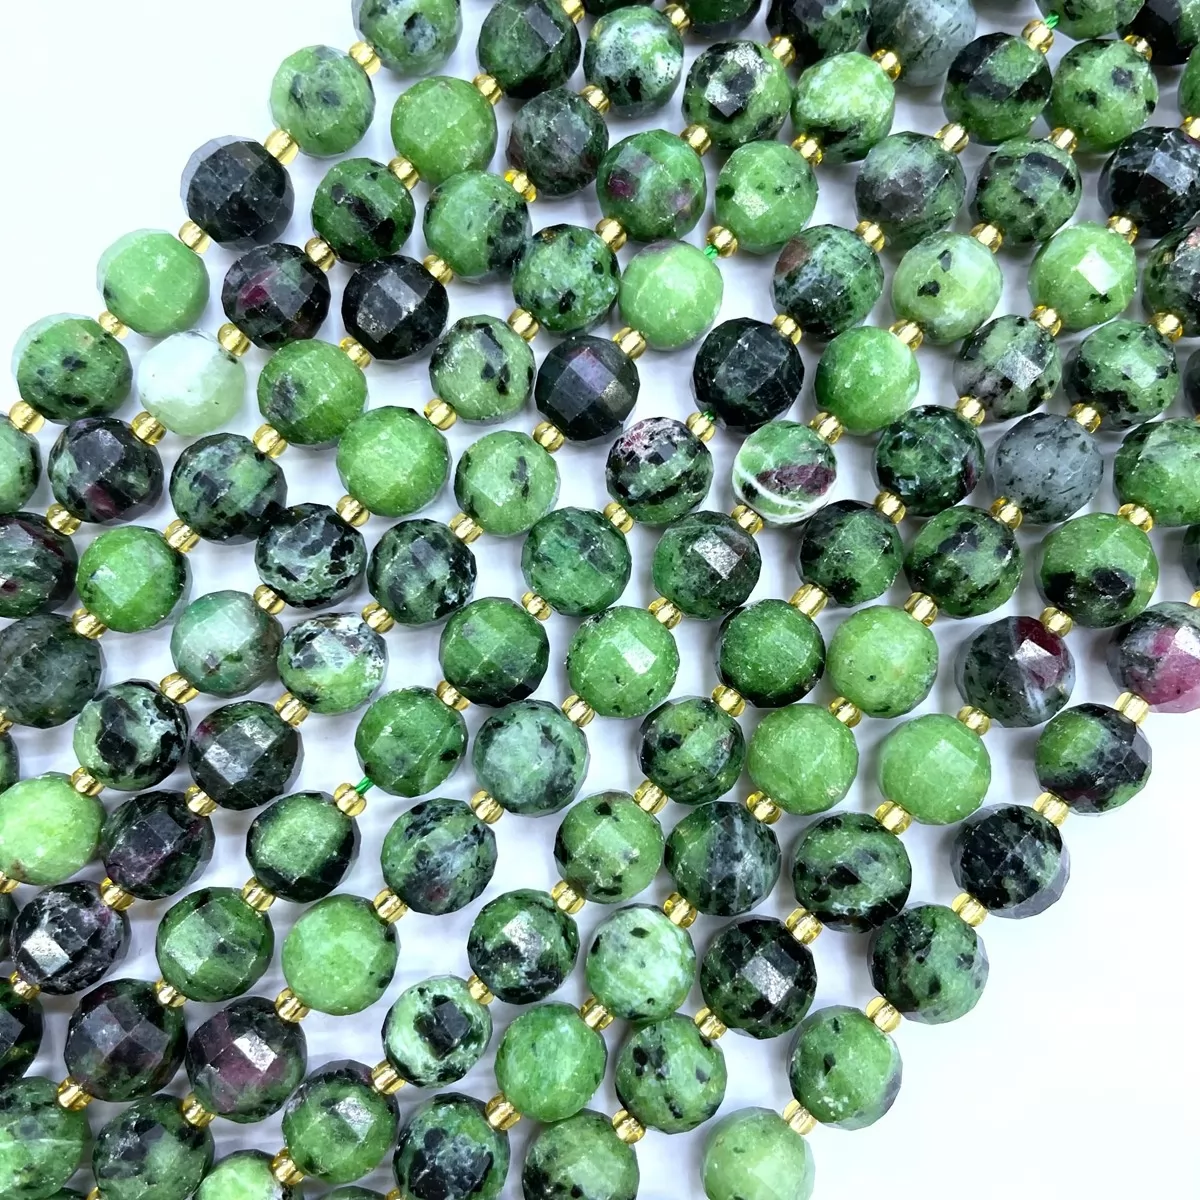 Ruby Zoisite, Lantern,8-10mm, Approx 380mm